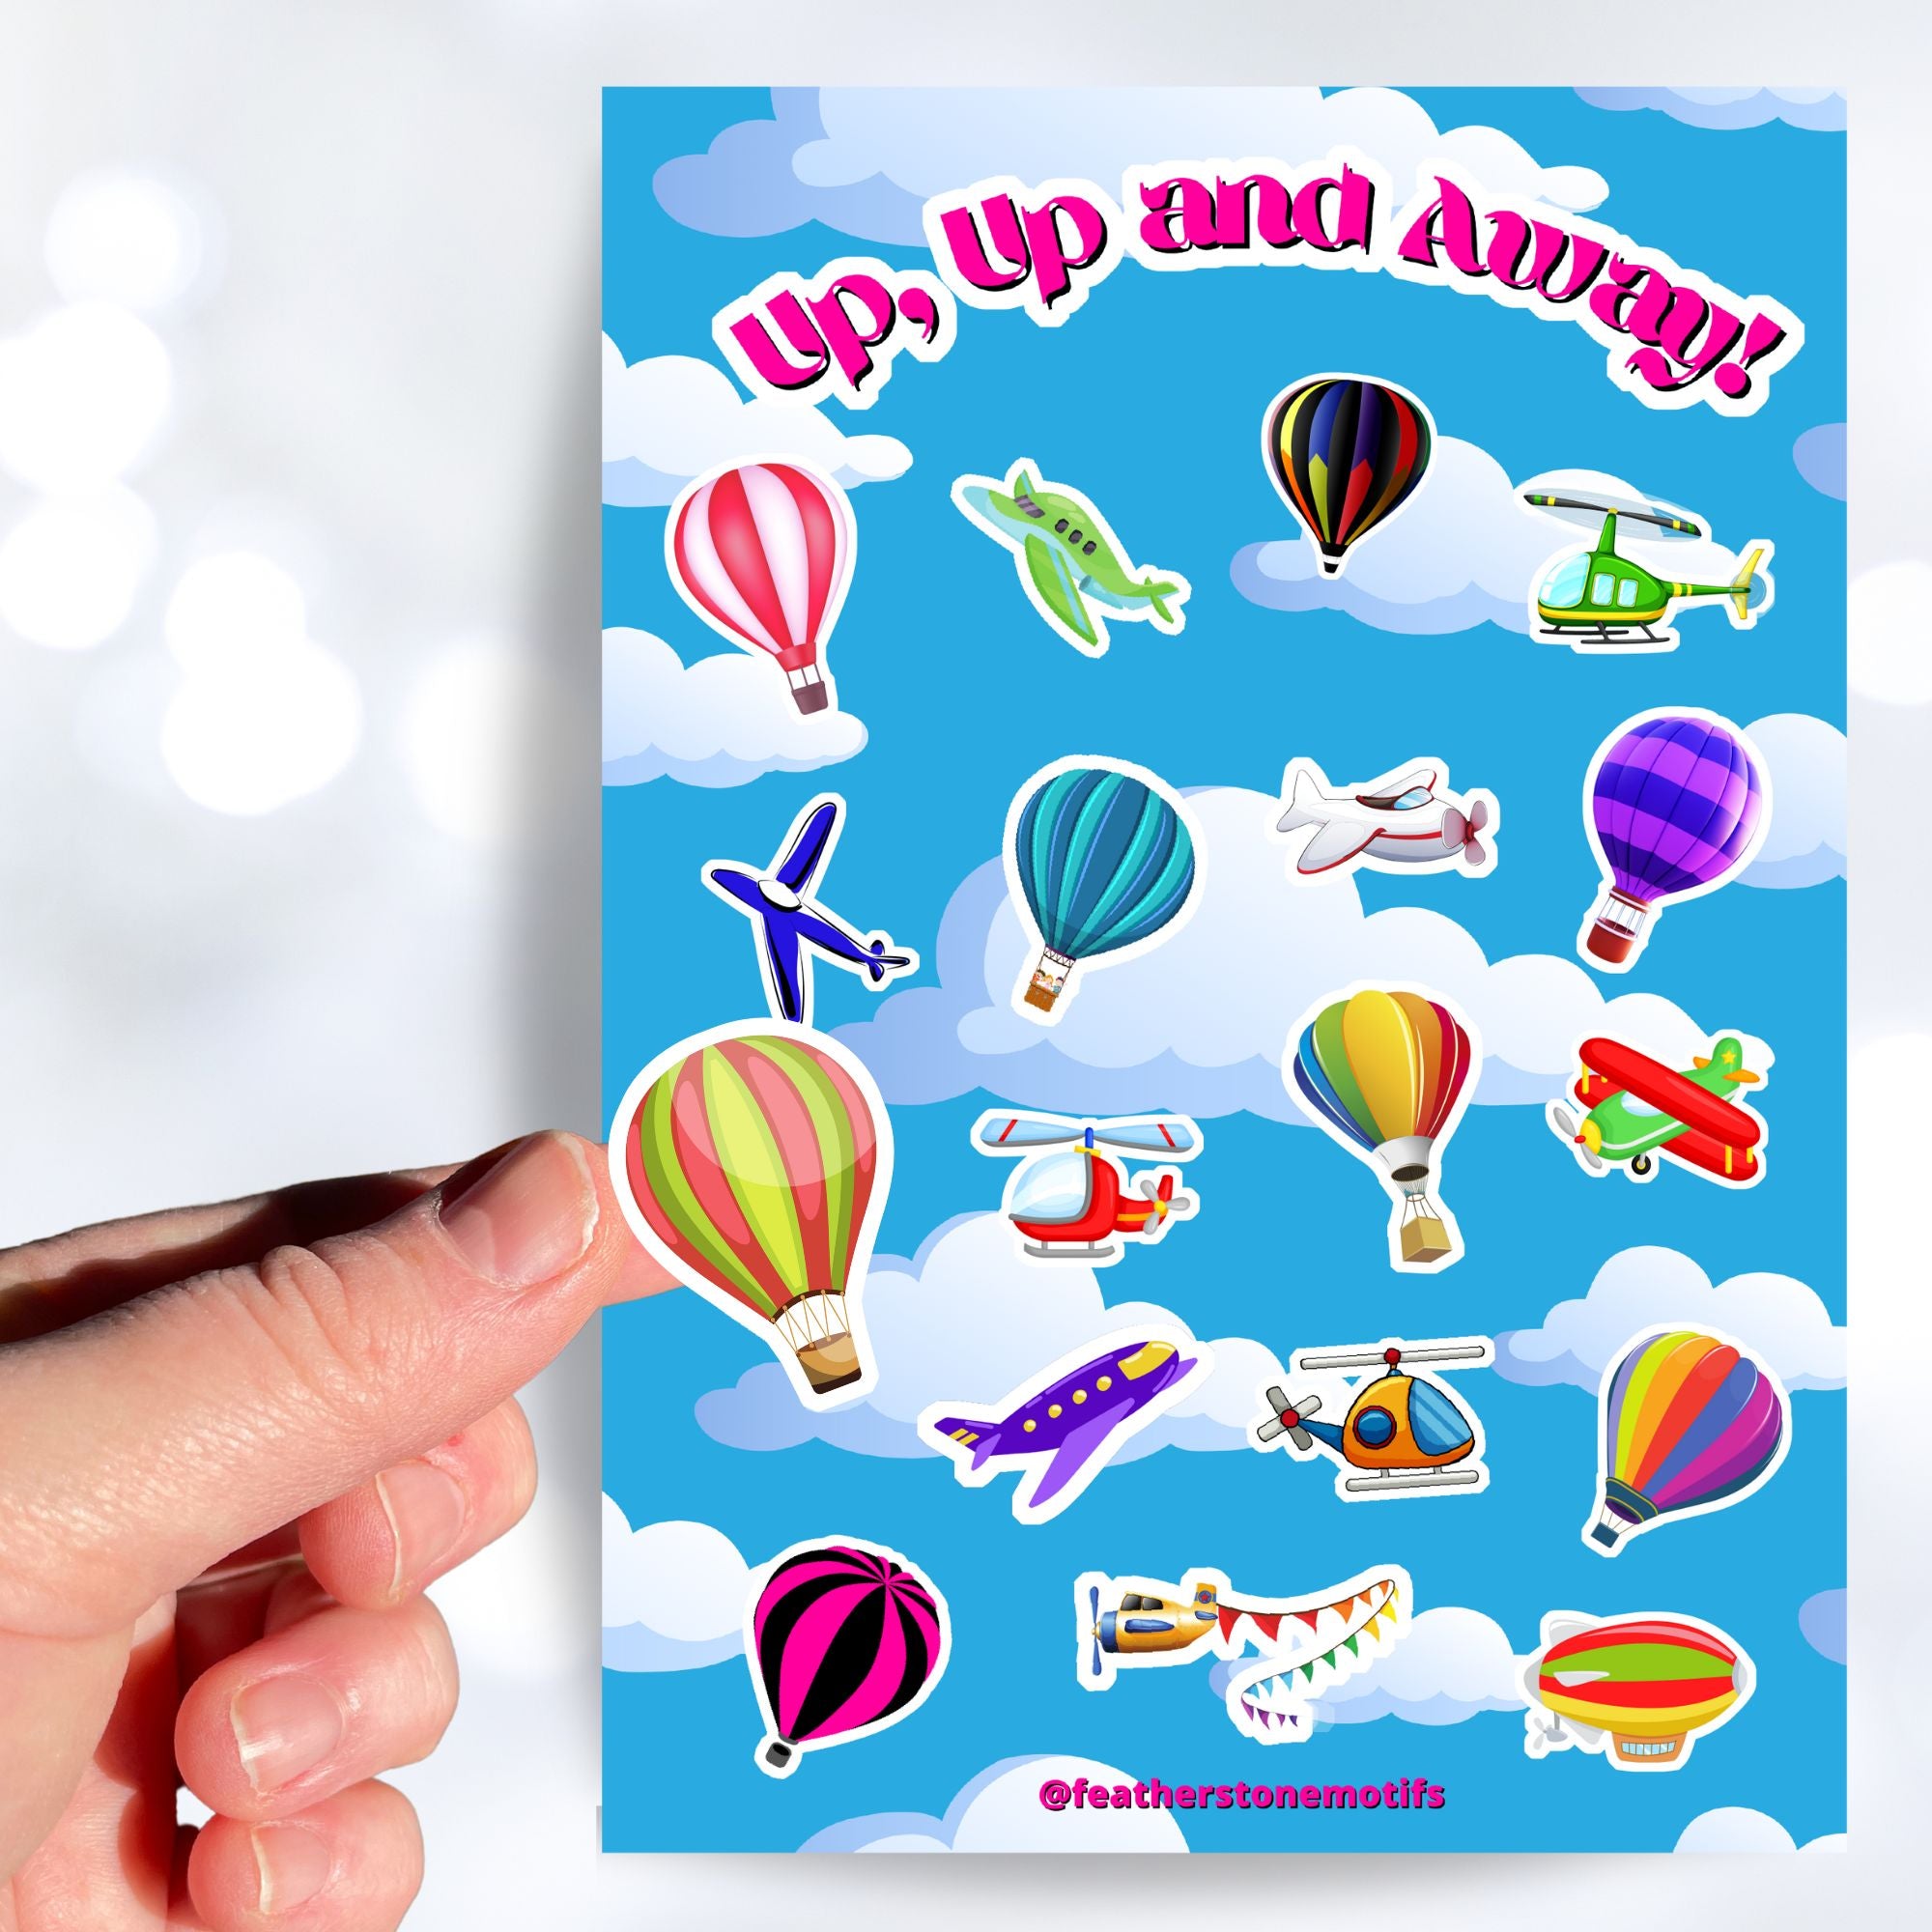 Fly away in a hot air balloon, a plane, or a helicopter with this sticker sheet. This image shows a hand holding a sticker of a red and lime colored hot air balloon above the sticker sheet.